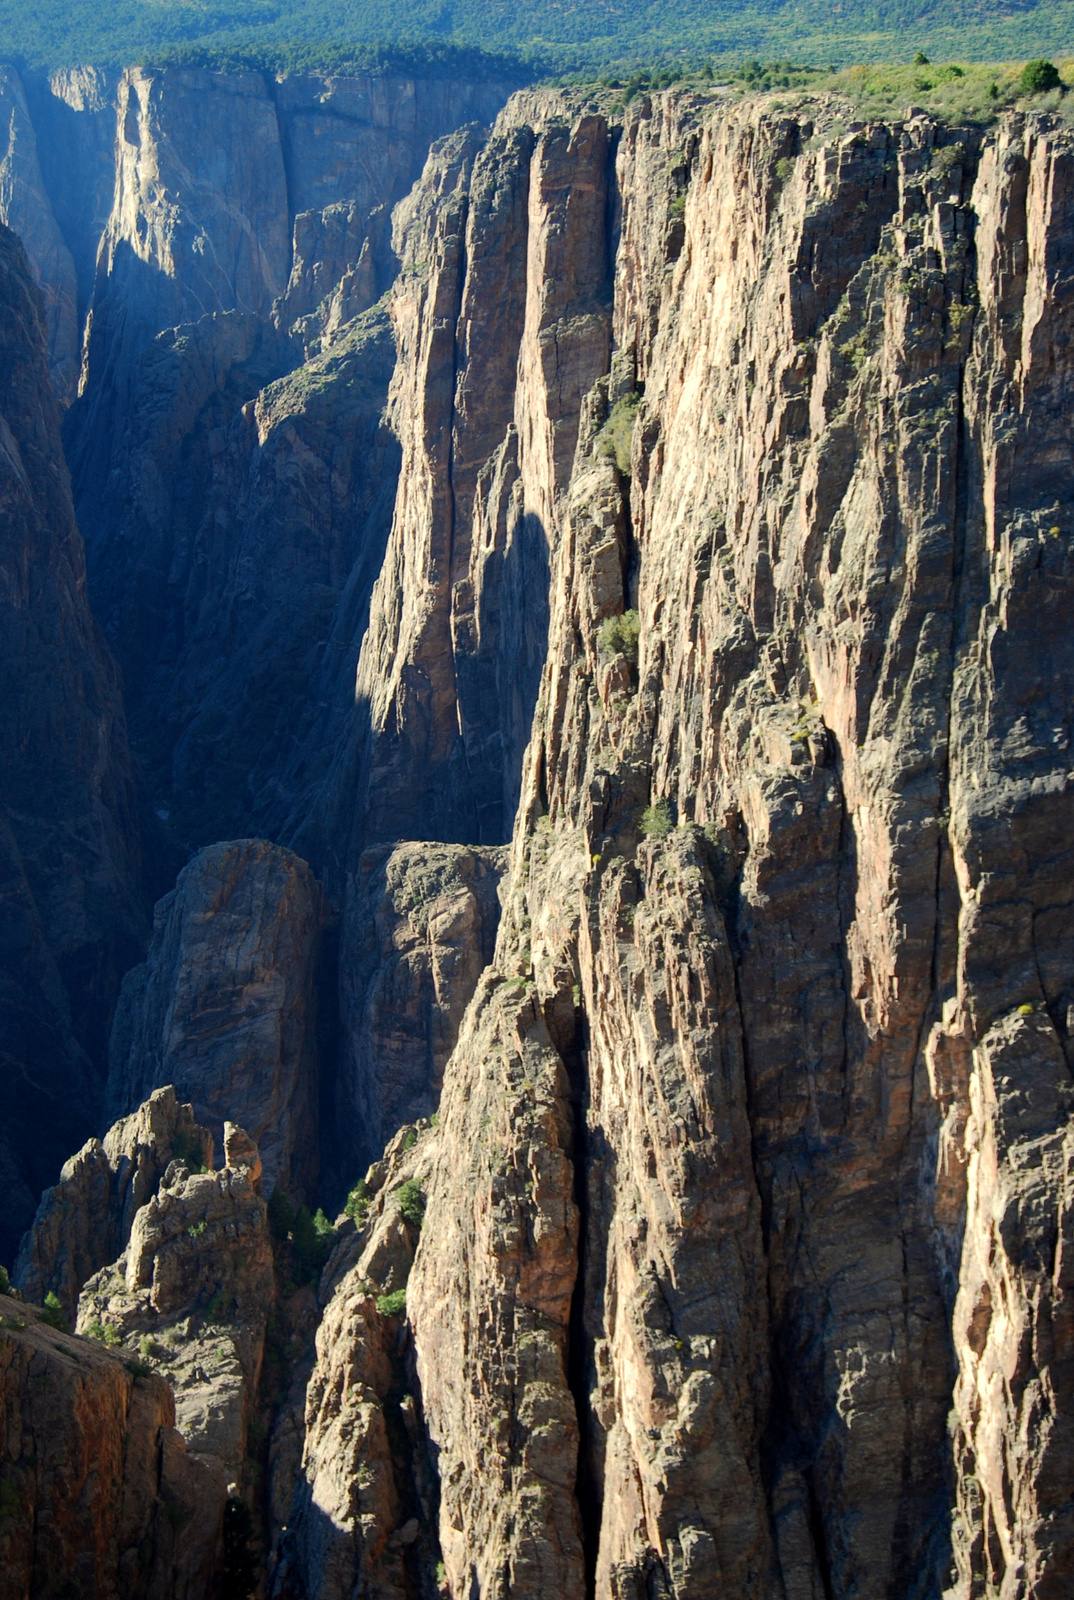 US14 0916 073 North Rim, Black Canyon Of The Gunnison NP, CO